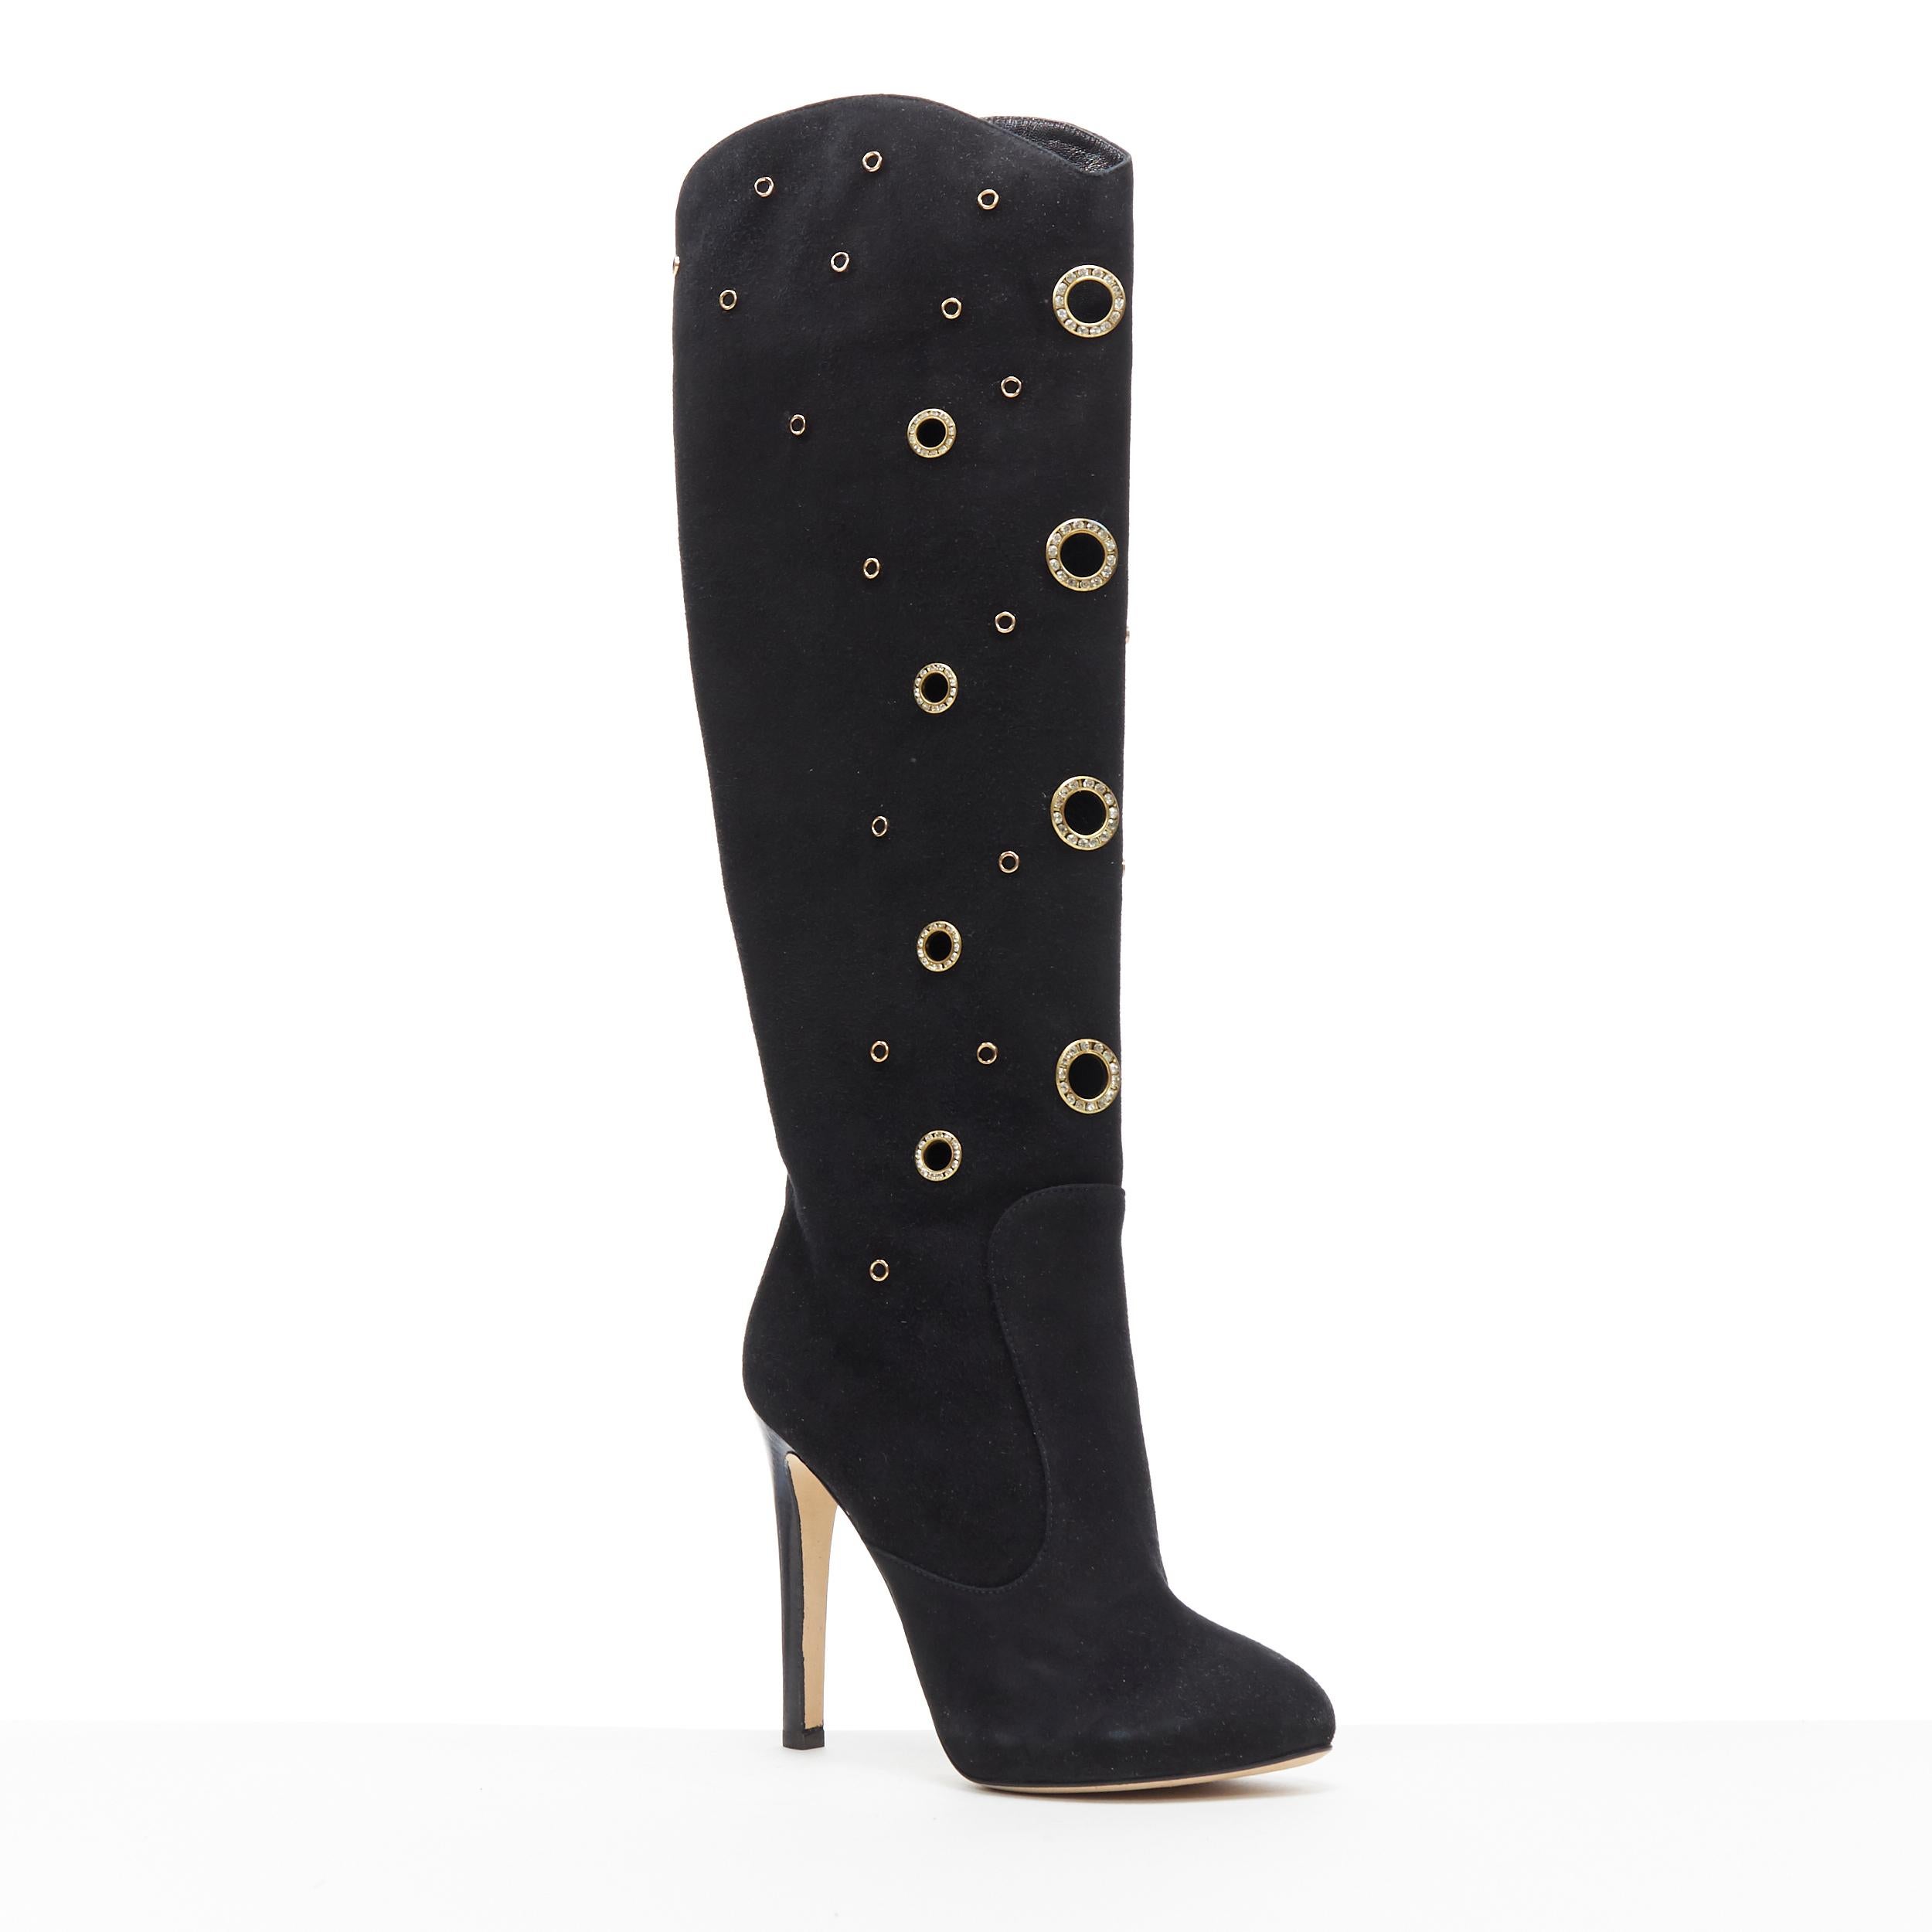 new GIUSEPPE ZANOTTI black suede gold crystal eyelet high heel tall boots EU37
Brand: Giuseppe Zanotti
Designer: Giuseppe Zanotti
Model Name / Style: Eyelet boots
Material: Suede
Color: Black
Pattern: Solid
Closure: Zip
Extra Detail: Black suede